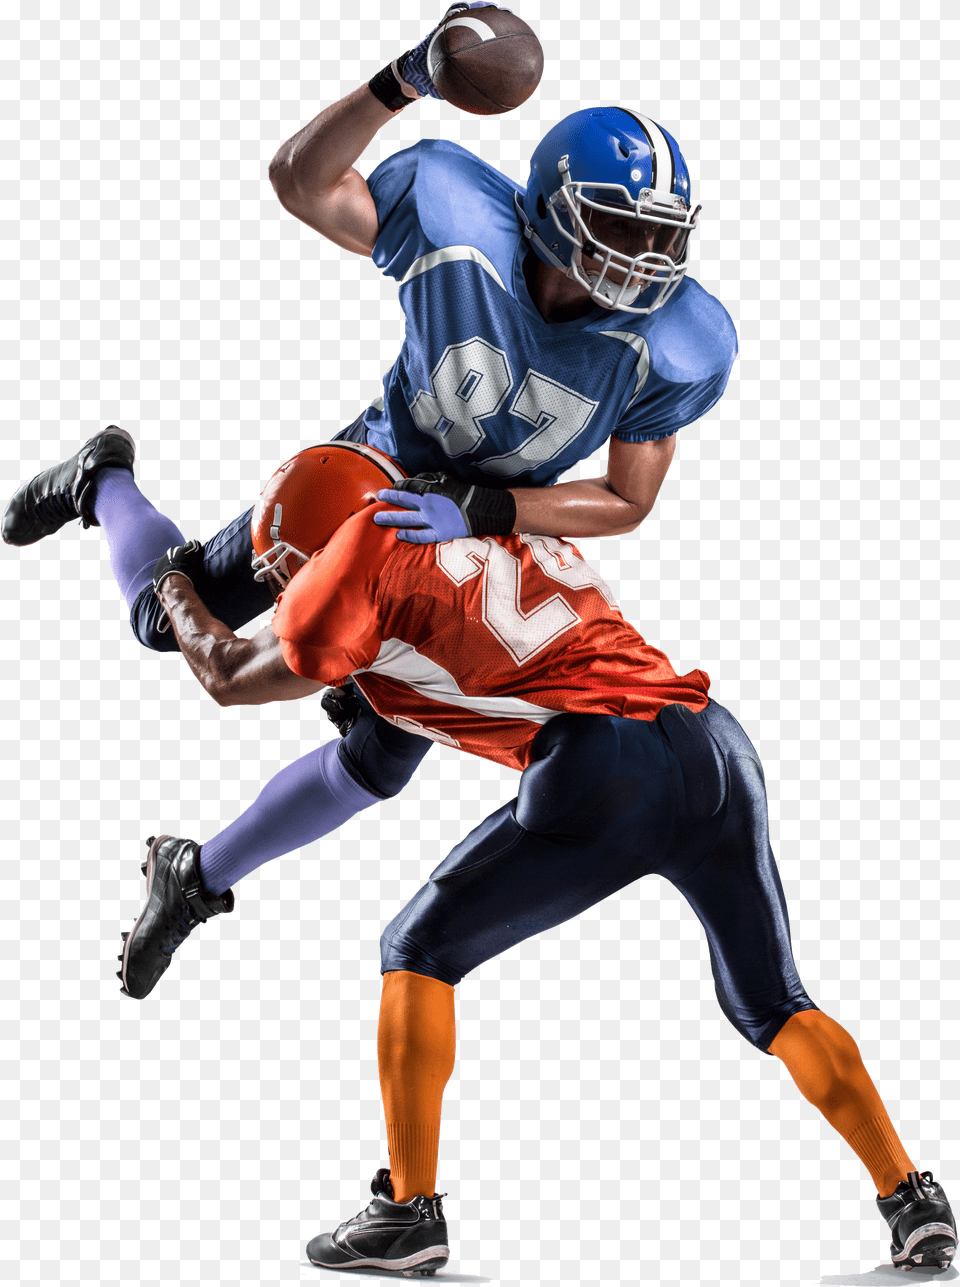 Nfl American Football Player Tackle American Football Player Png Image